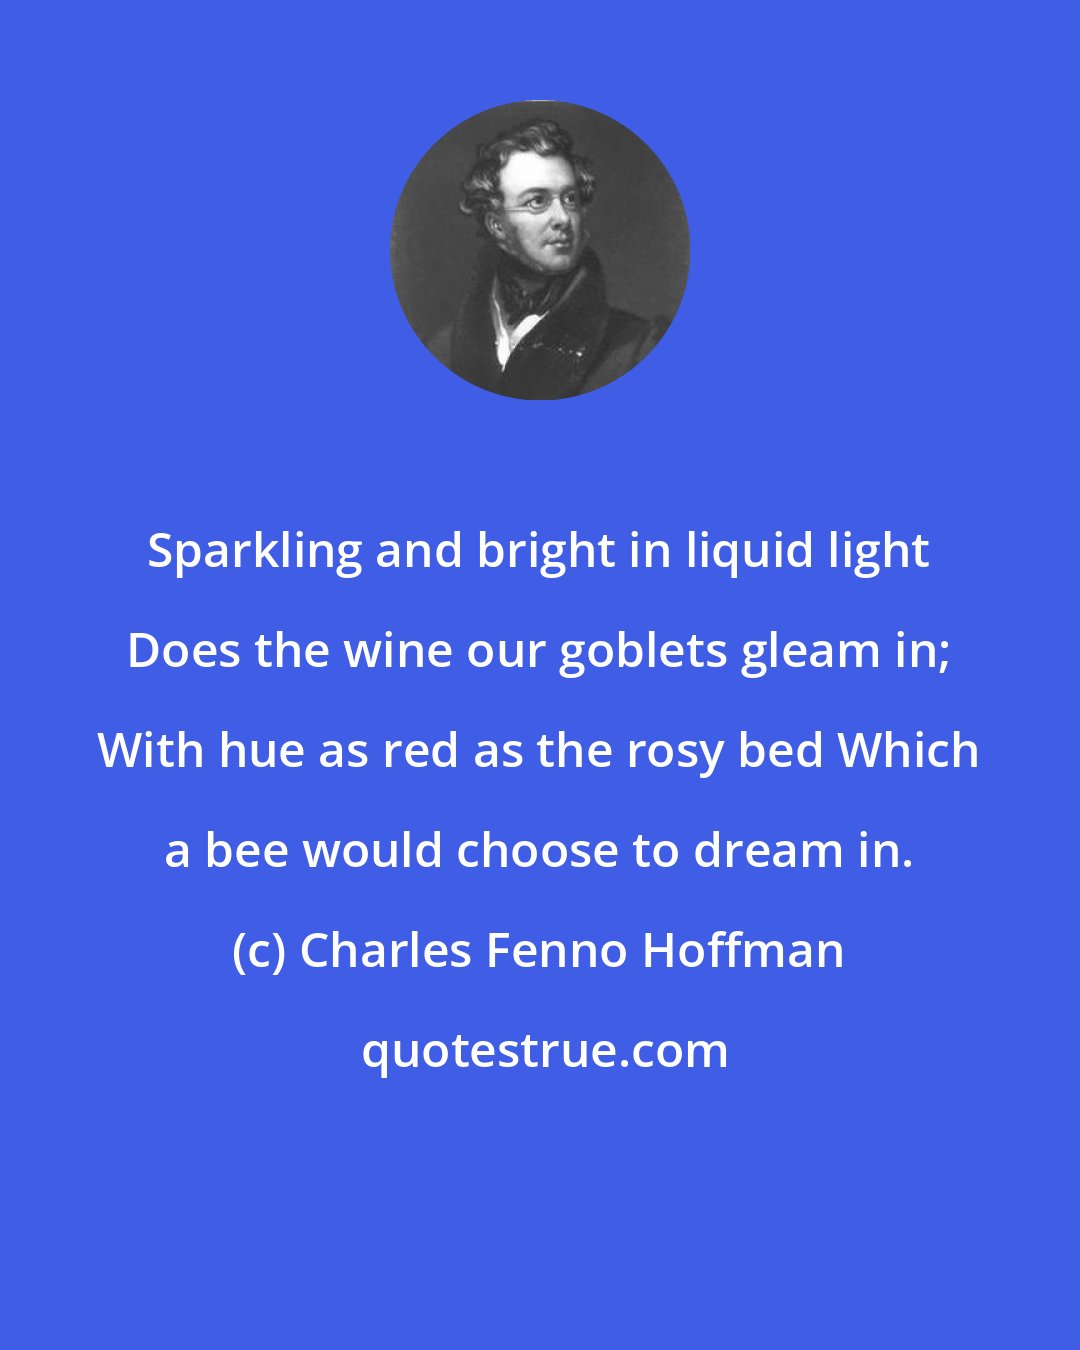 Charles Fenno Hoffman: Sparkling and bright in liquid light Does the wine our goblets gleam in; With hue as red as the rosy bed Which a bee would choose to dream in.